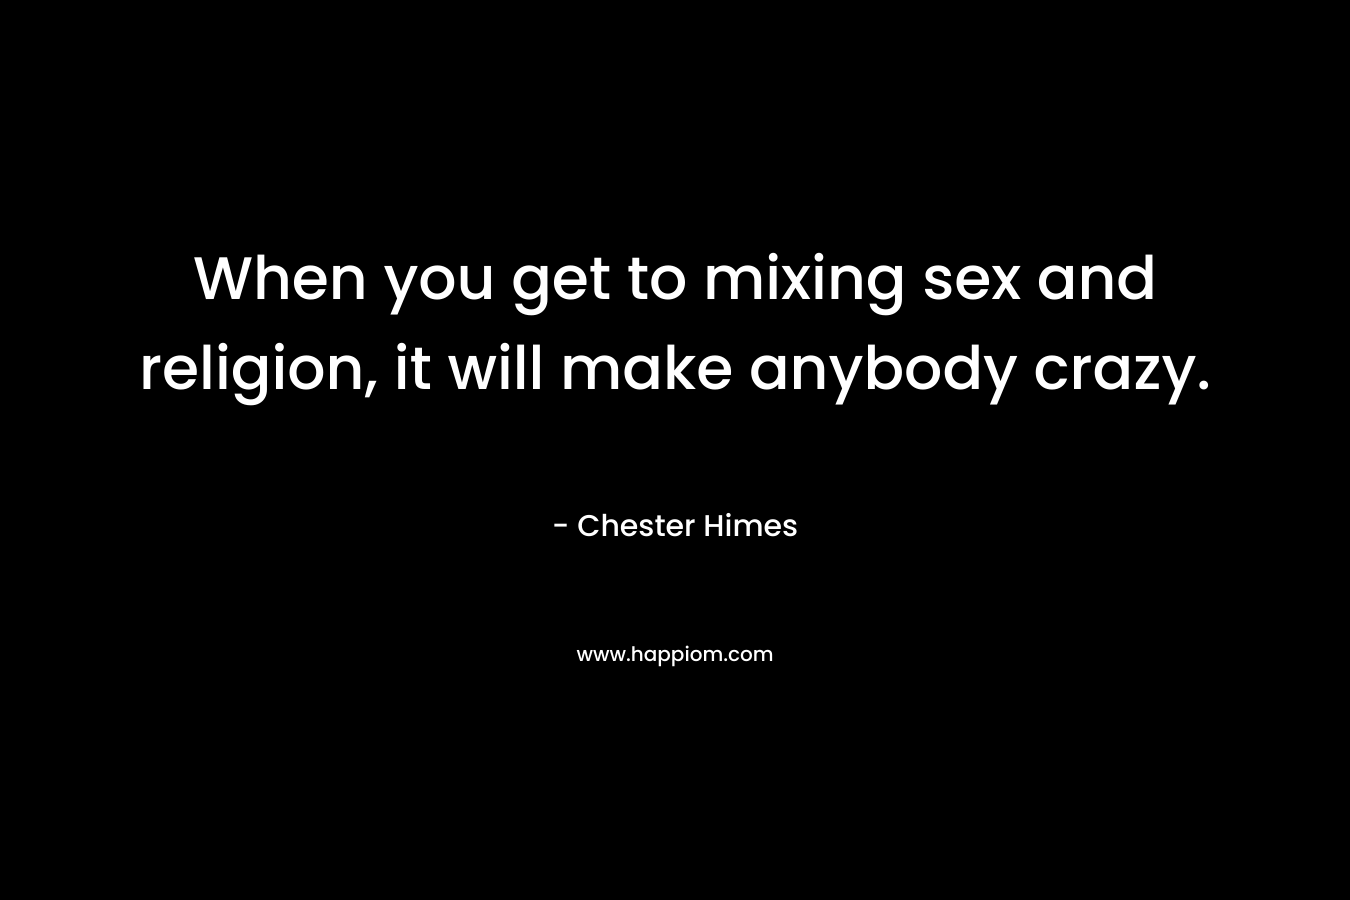 When you get to mixing sex and religion, it will make anybody crazy.